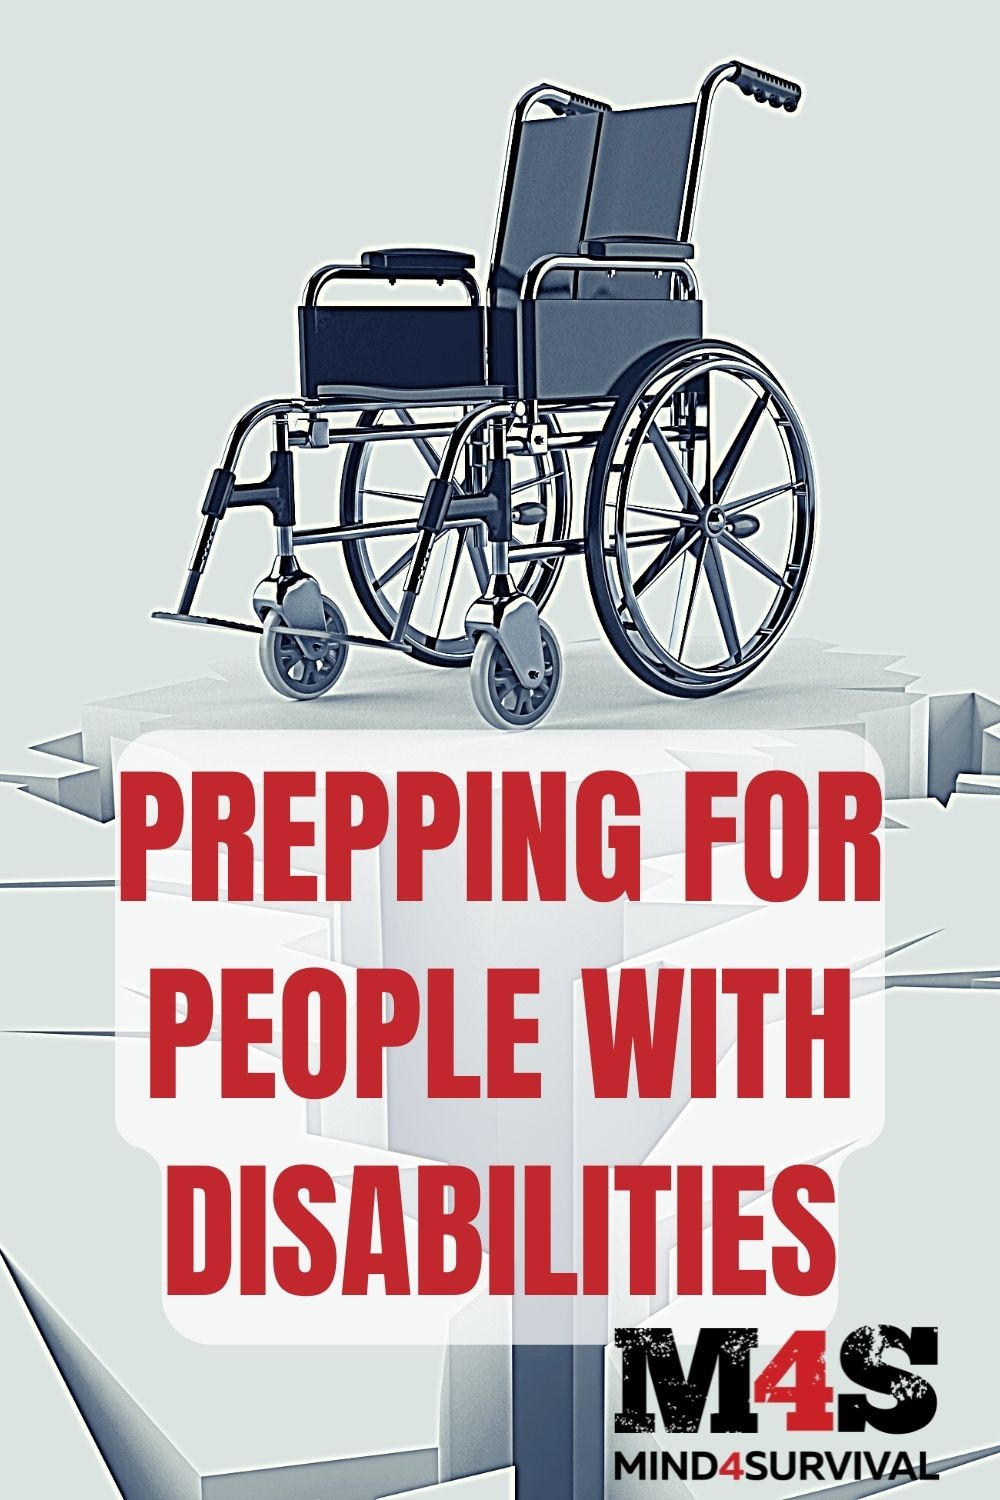 145: Prepping for People With Disabilities